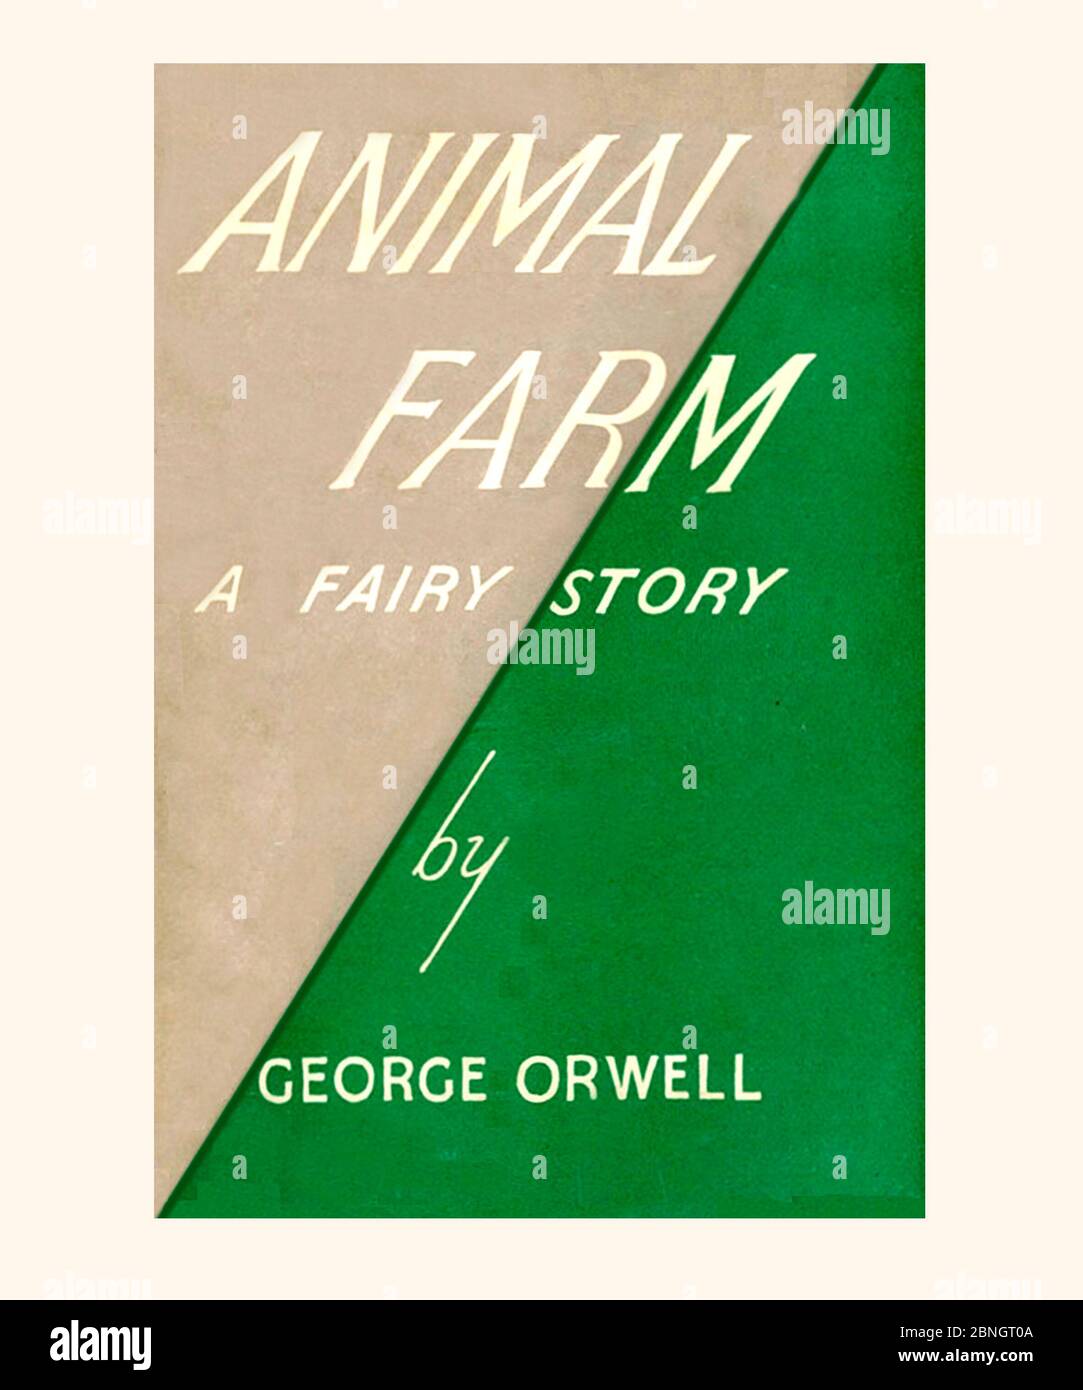 George Orwell Animal Farm A Fairy Story First Edition Book Cover 1945 Refreshed and Reset Foto Stock